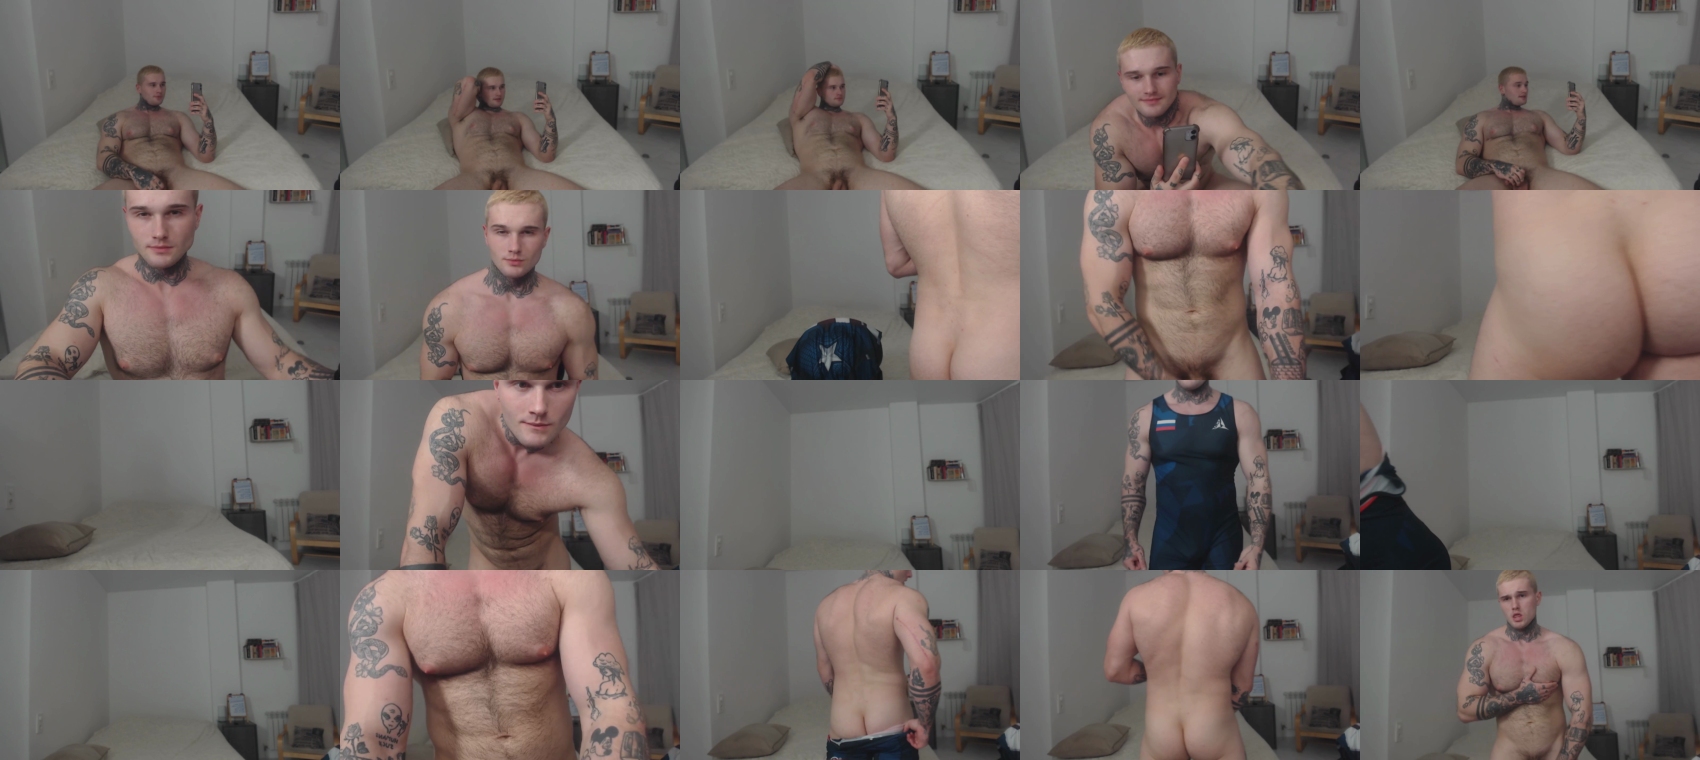 andy_hunk sex CAM SHOW @ Chaturbate 31-12-2021